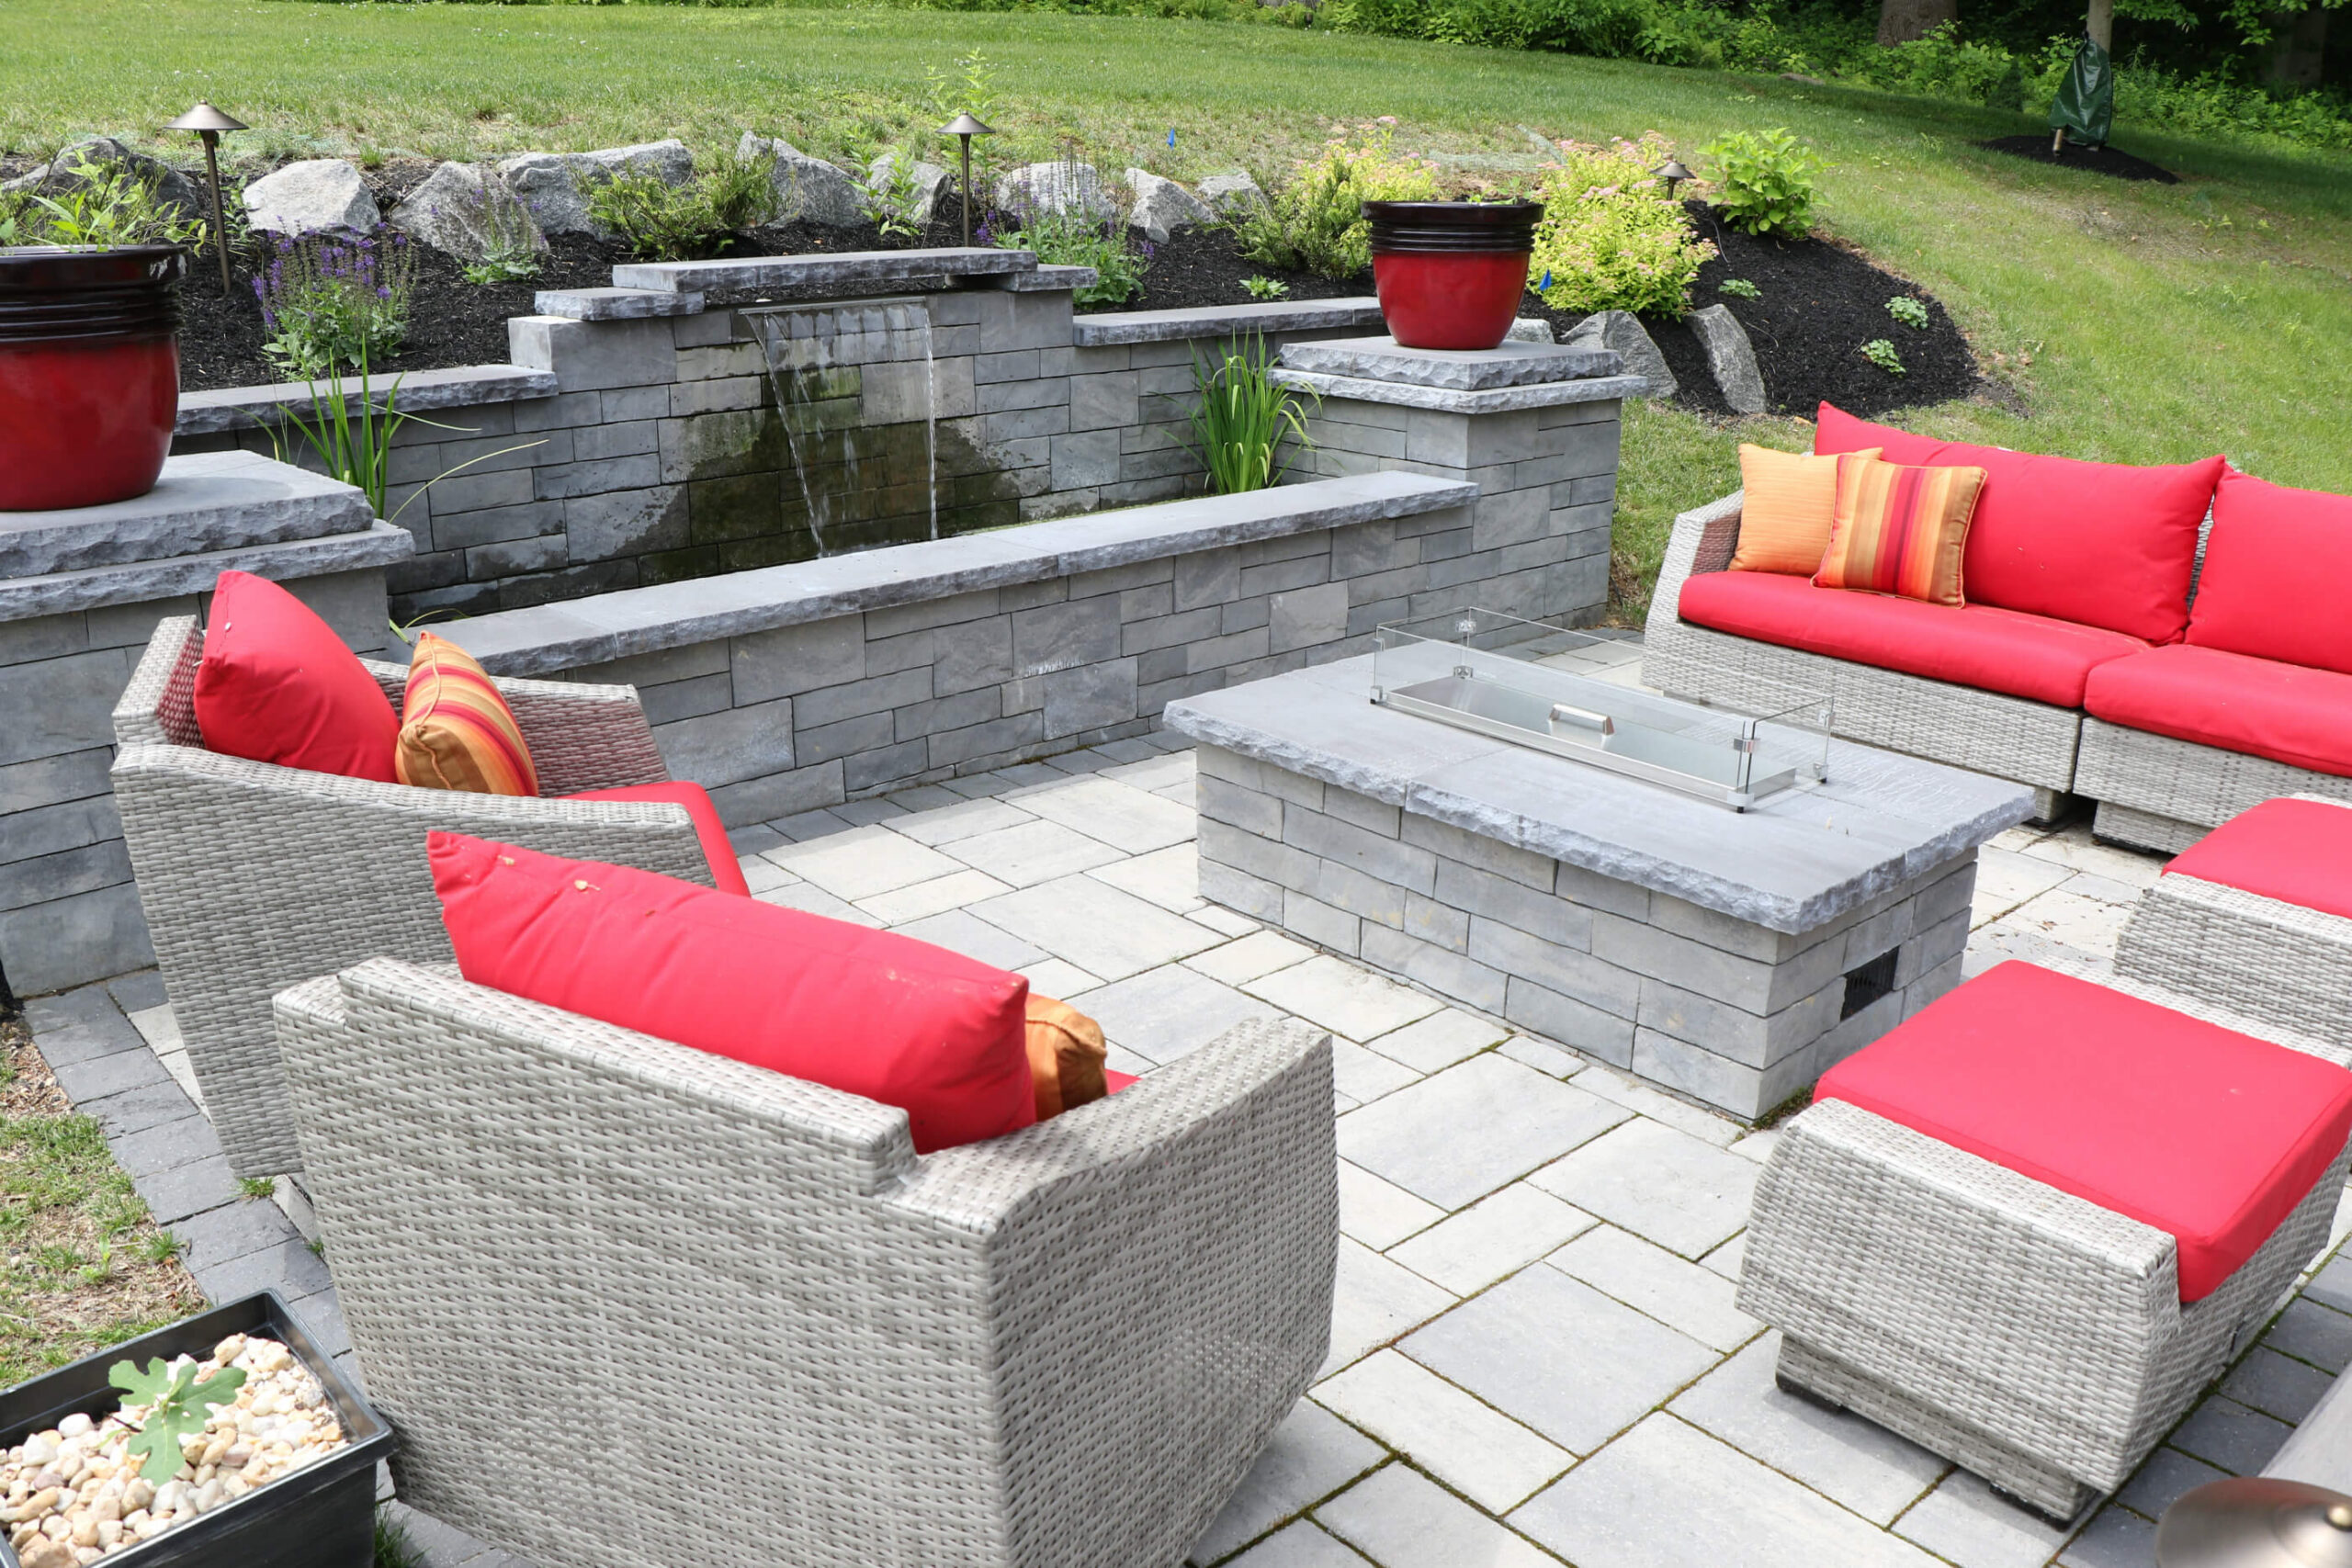  Rectangular gas firepit with seating and fountain/wallFireplaces and Firepits Options |  Burkholder Landscape